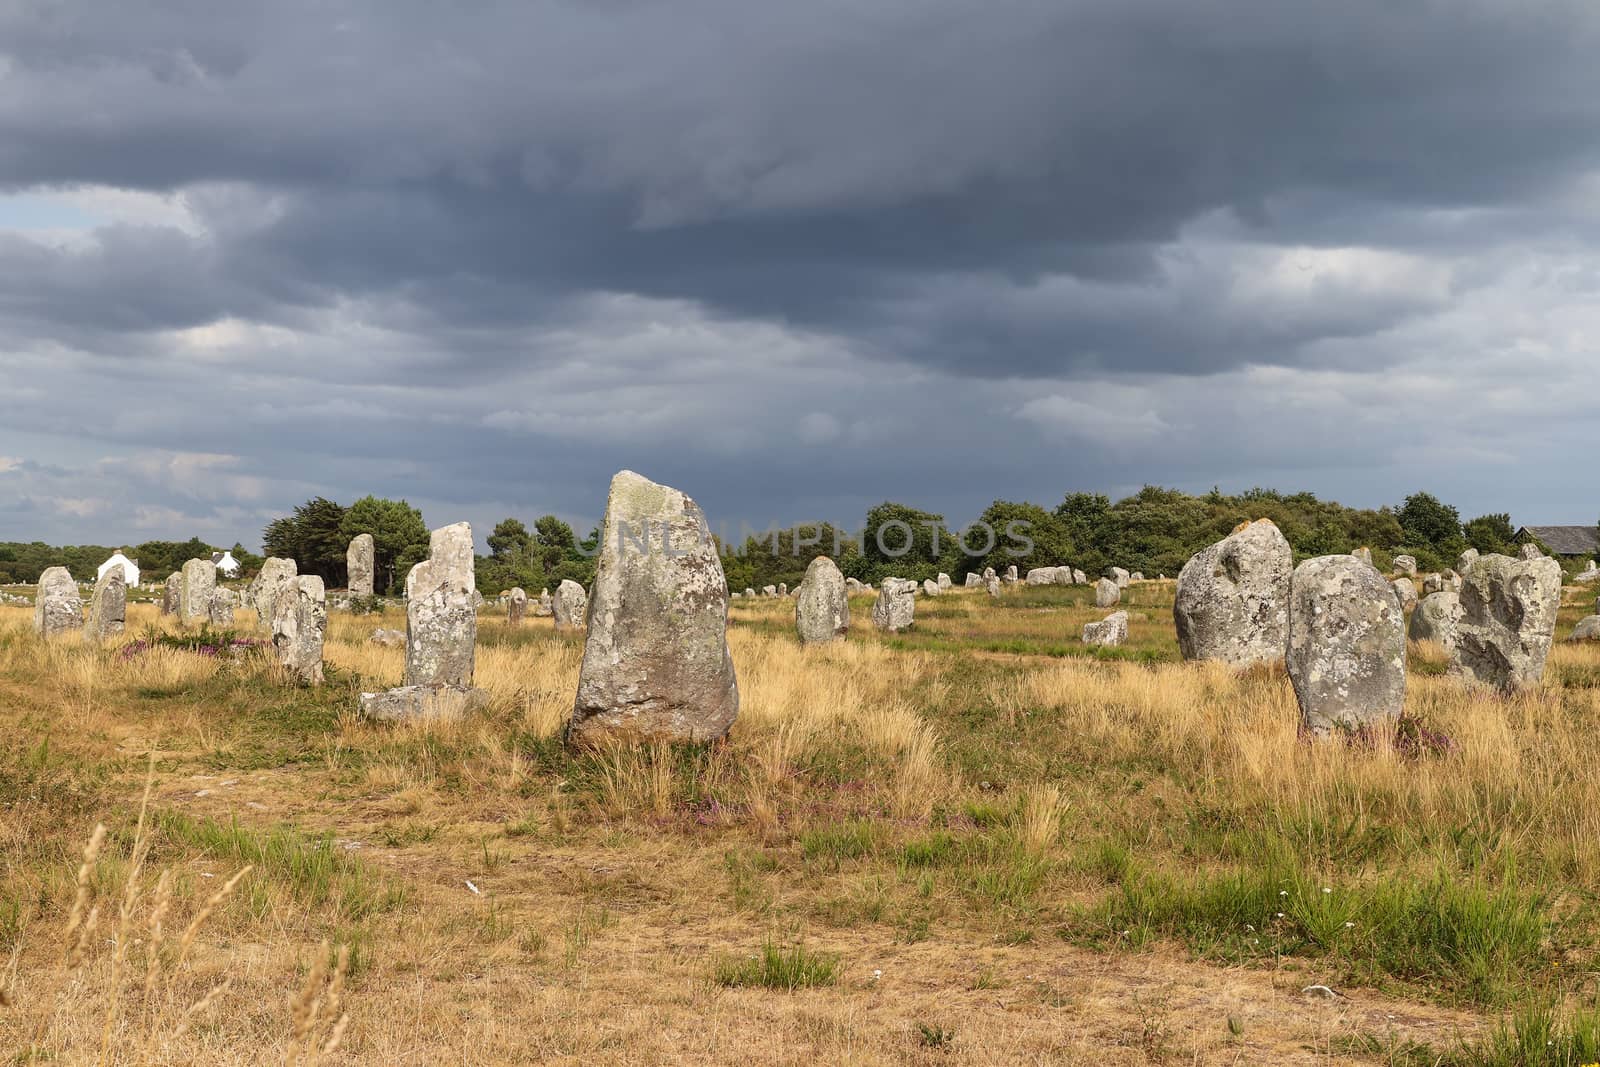 Alignements du Menec - rows of Menhirs - standing stones - the largest megalithic site in the world, Carnac, Brittany, France
